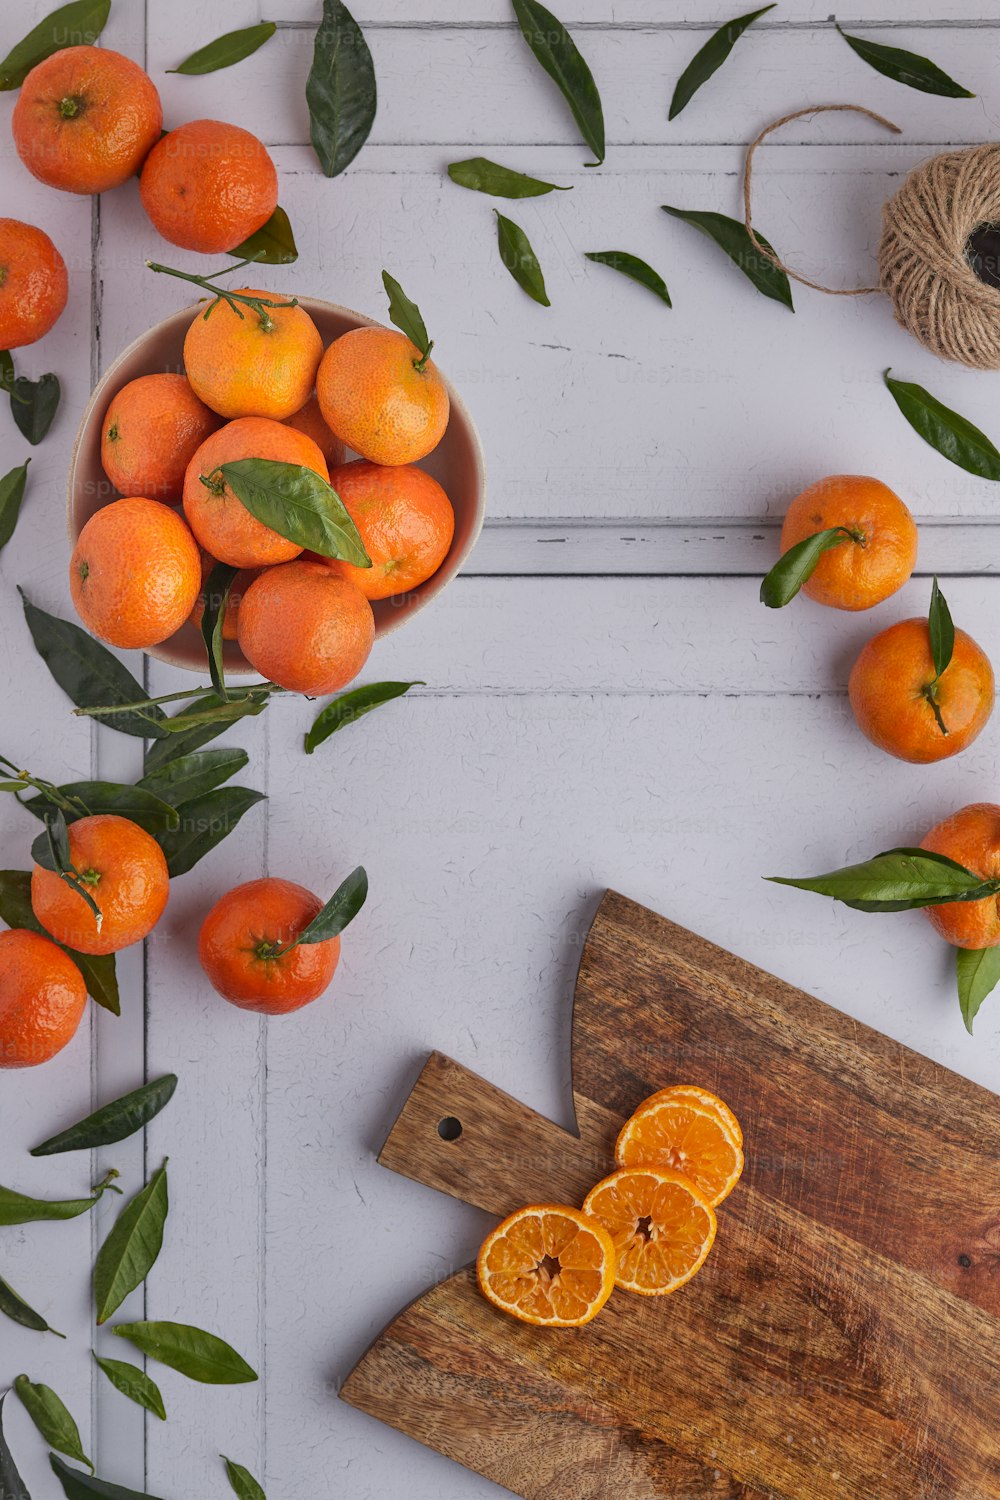 a group of oranges on a wooden surface